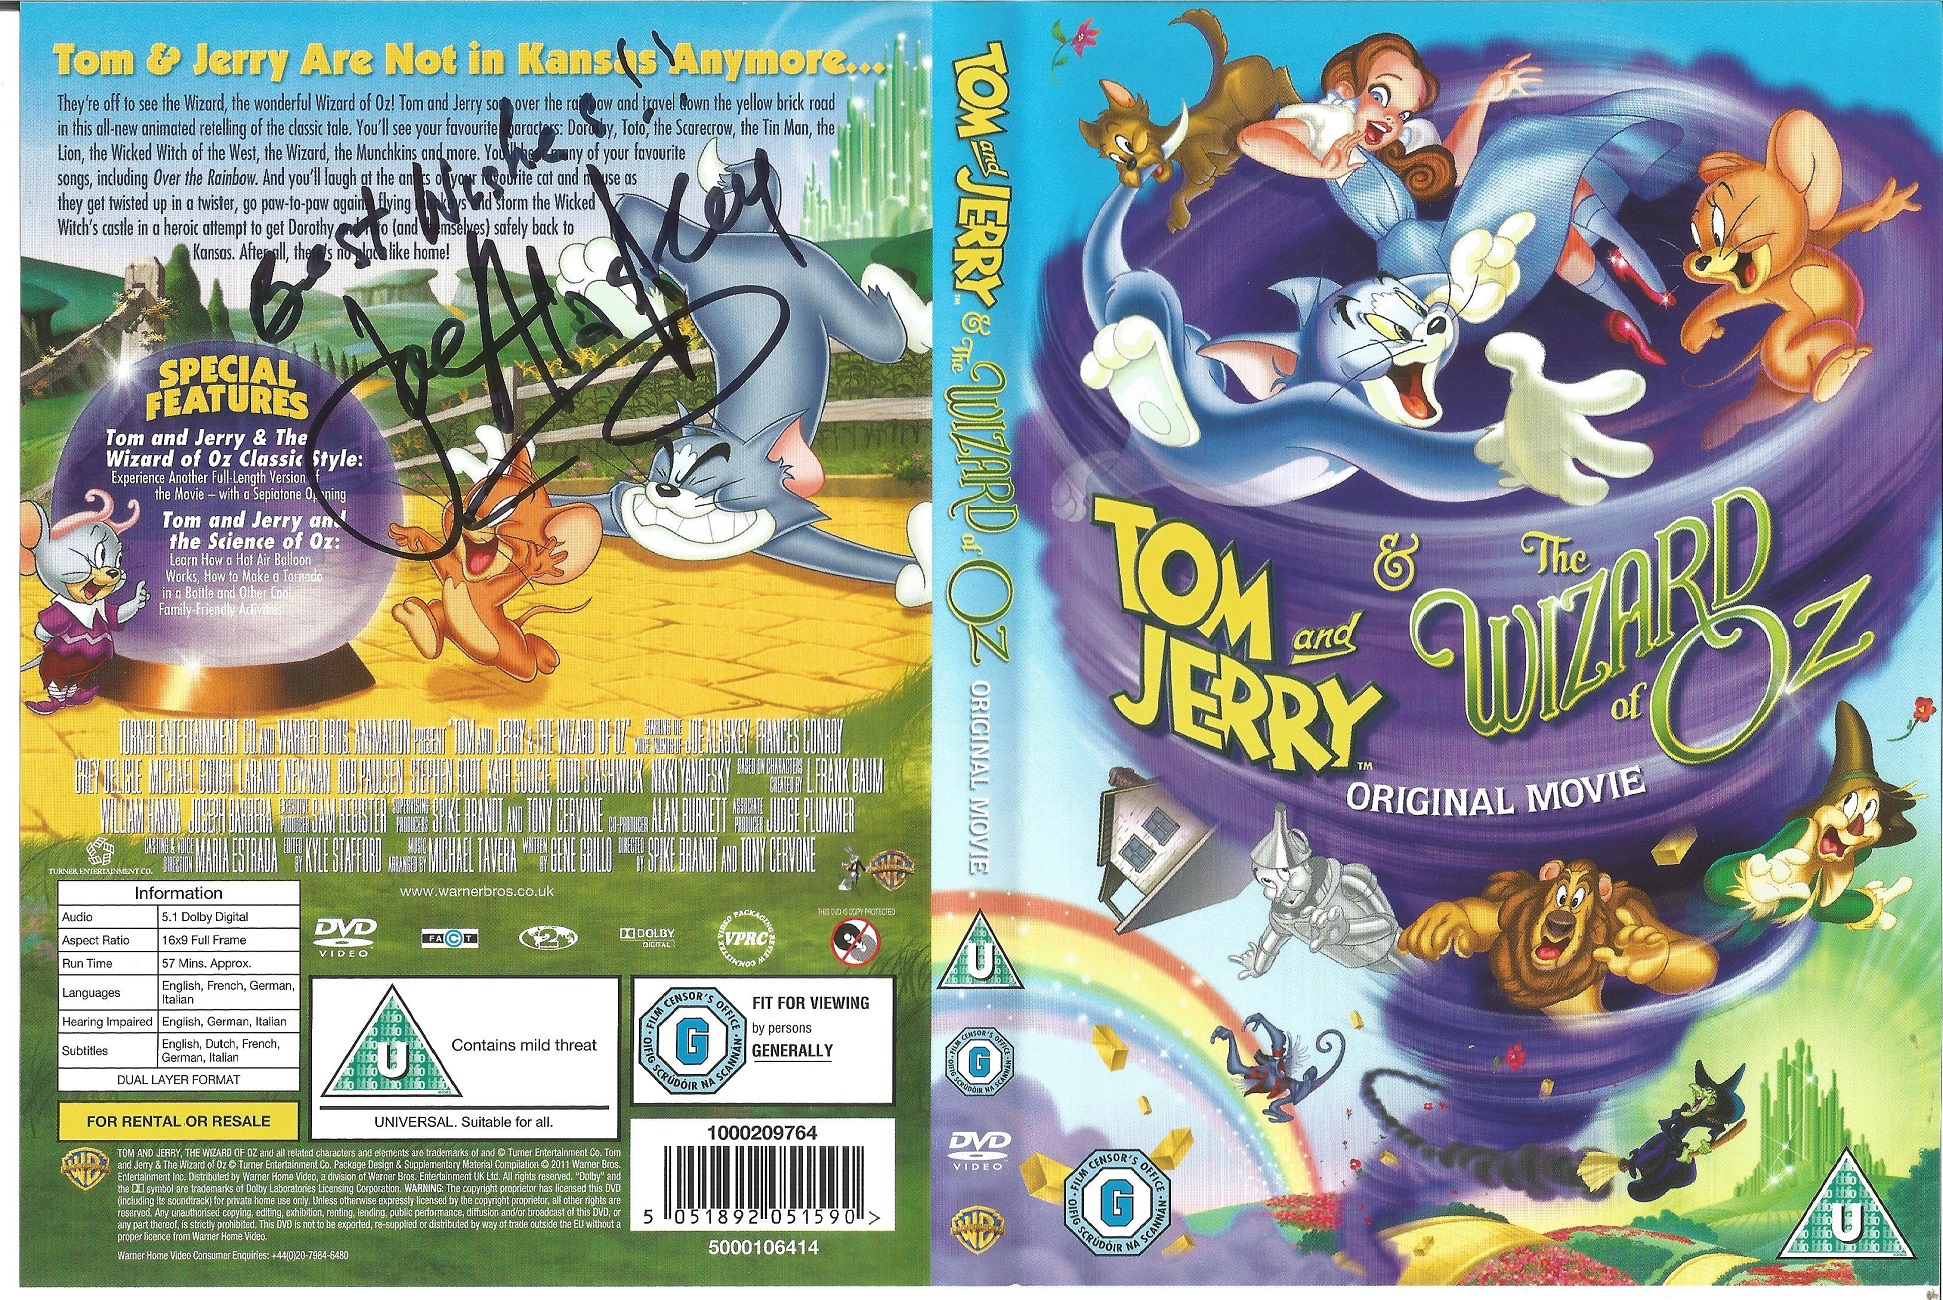 Tom and Jerry and the Wizard of OZ original movie DVD signed on the cover by Joe Alaskey. Disc